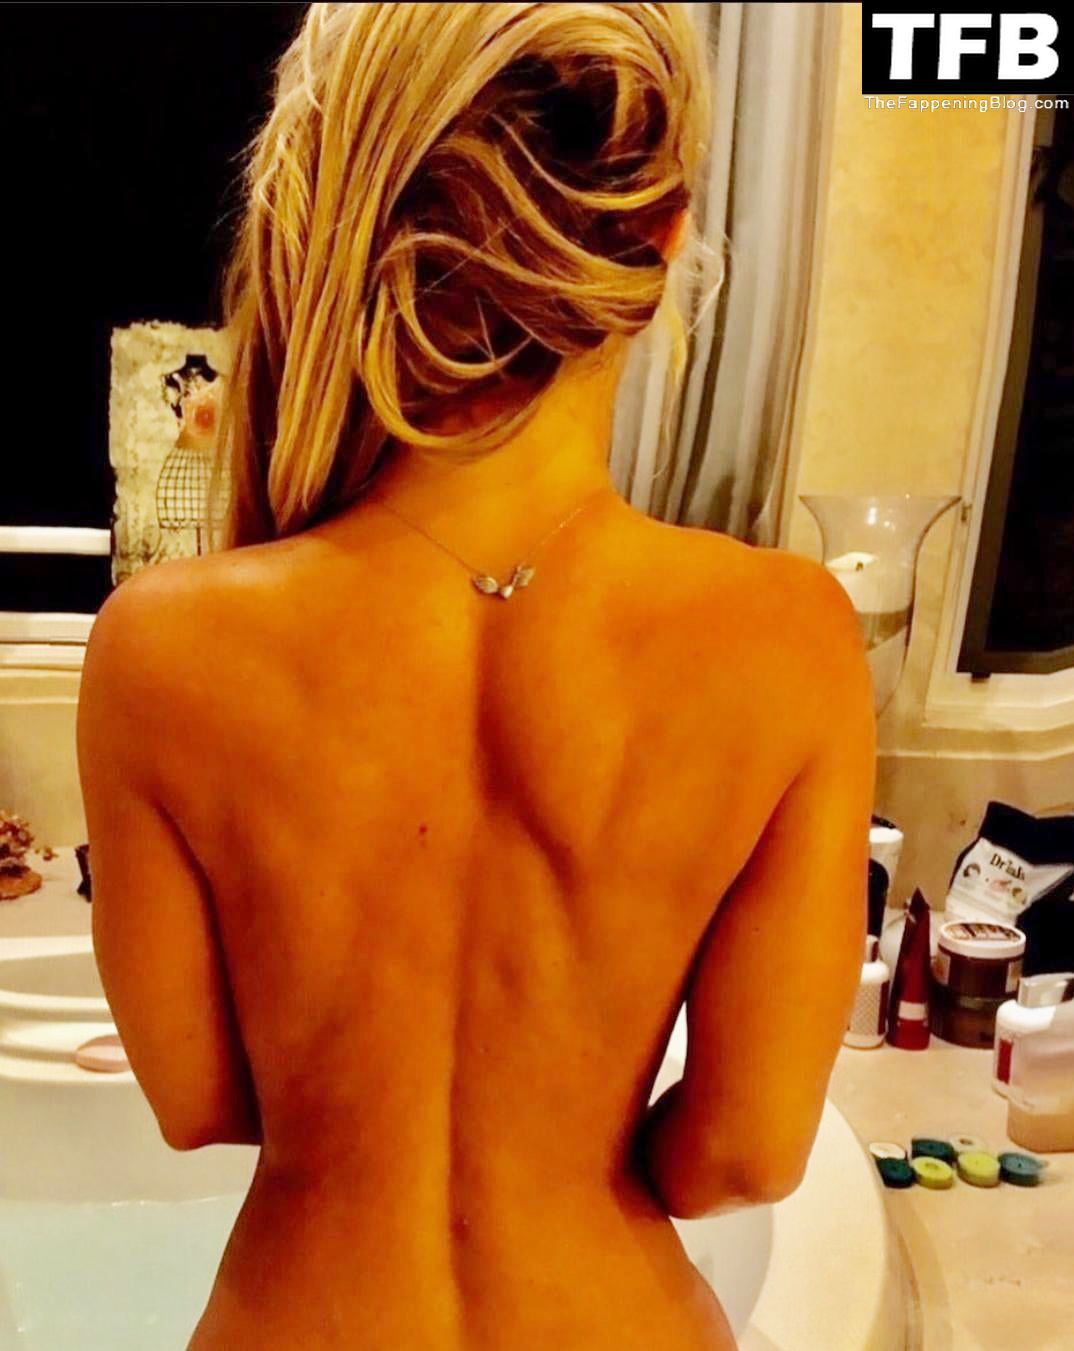 Britney Spears Topless 2 thefappeningblog.com  - Britney Spears Topless & Sexy (18 Photos)